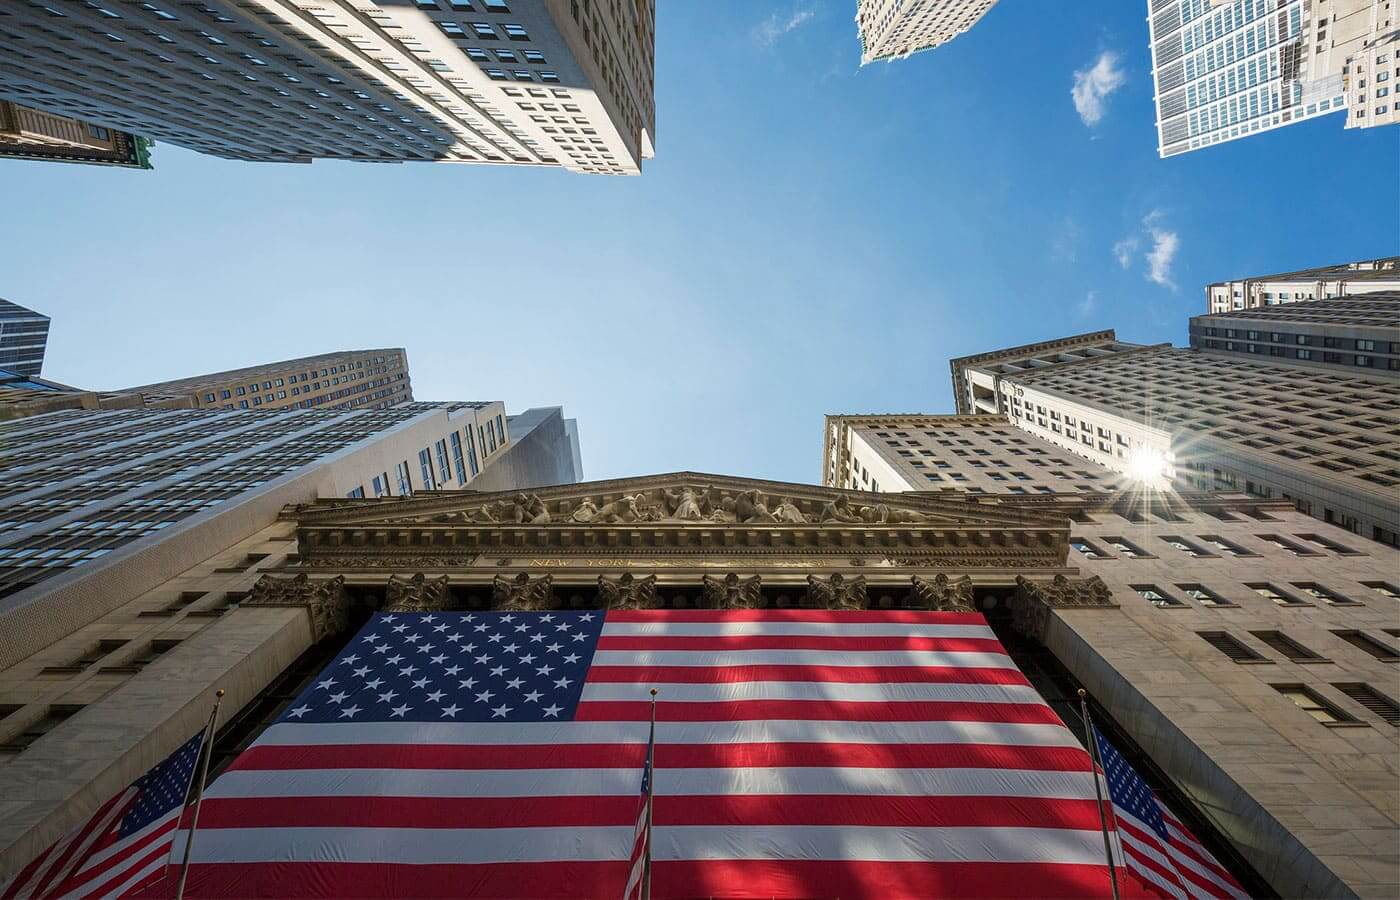 Entrance to the New York Stock Exchange on Wall Street